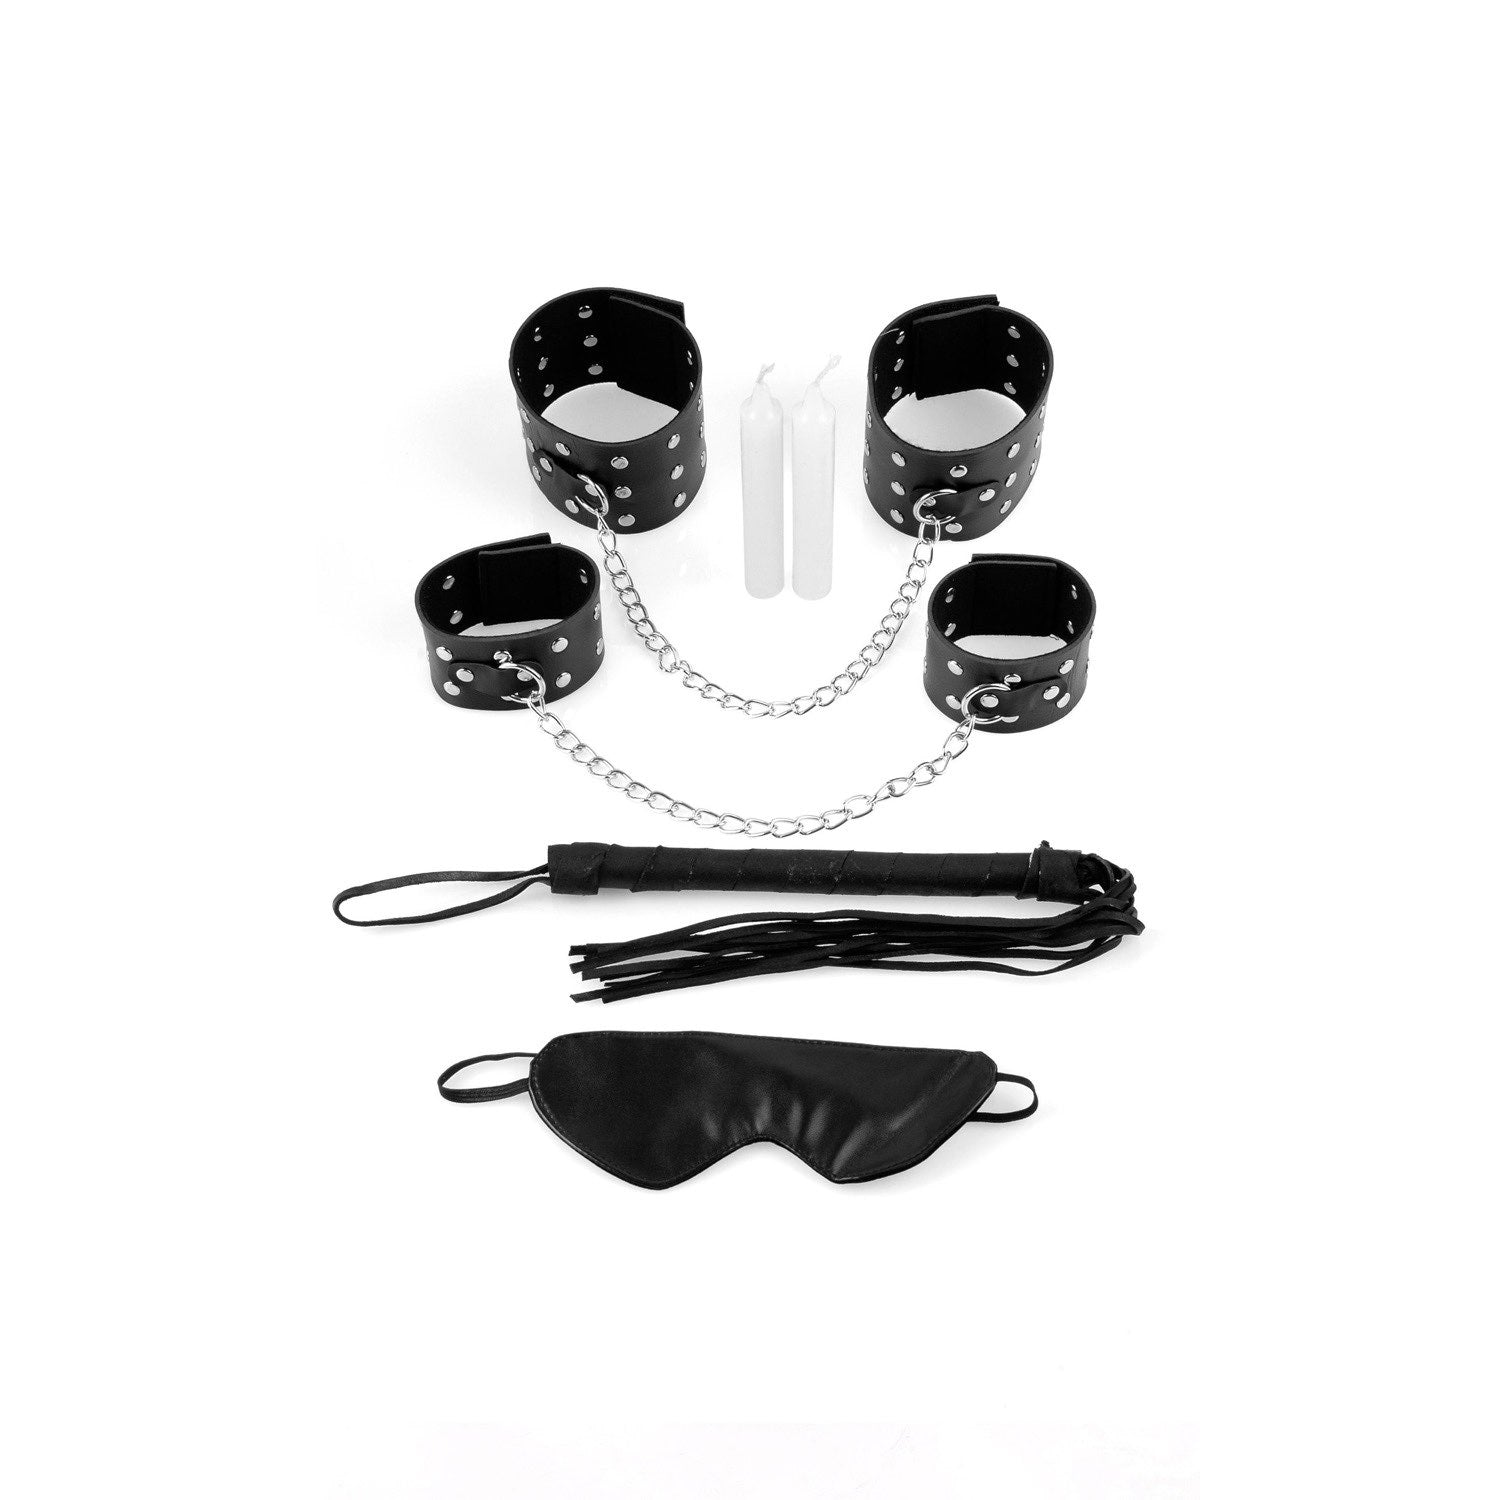 Fetish Fantasy Series Chains Of Love Bondage Kit - 5 Piece Set by Pipedream